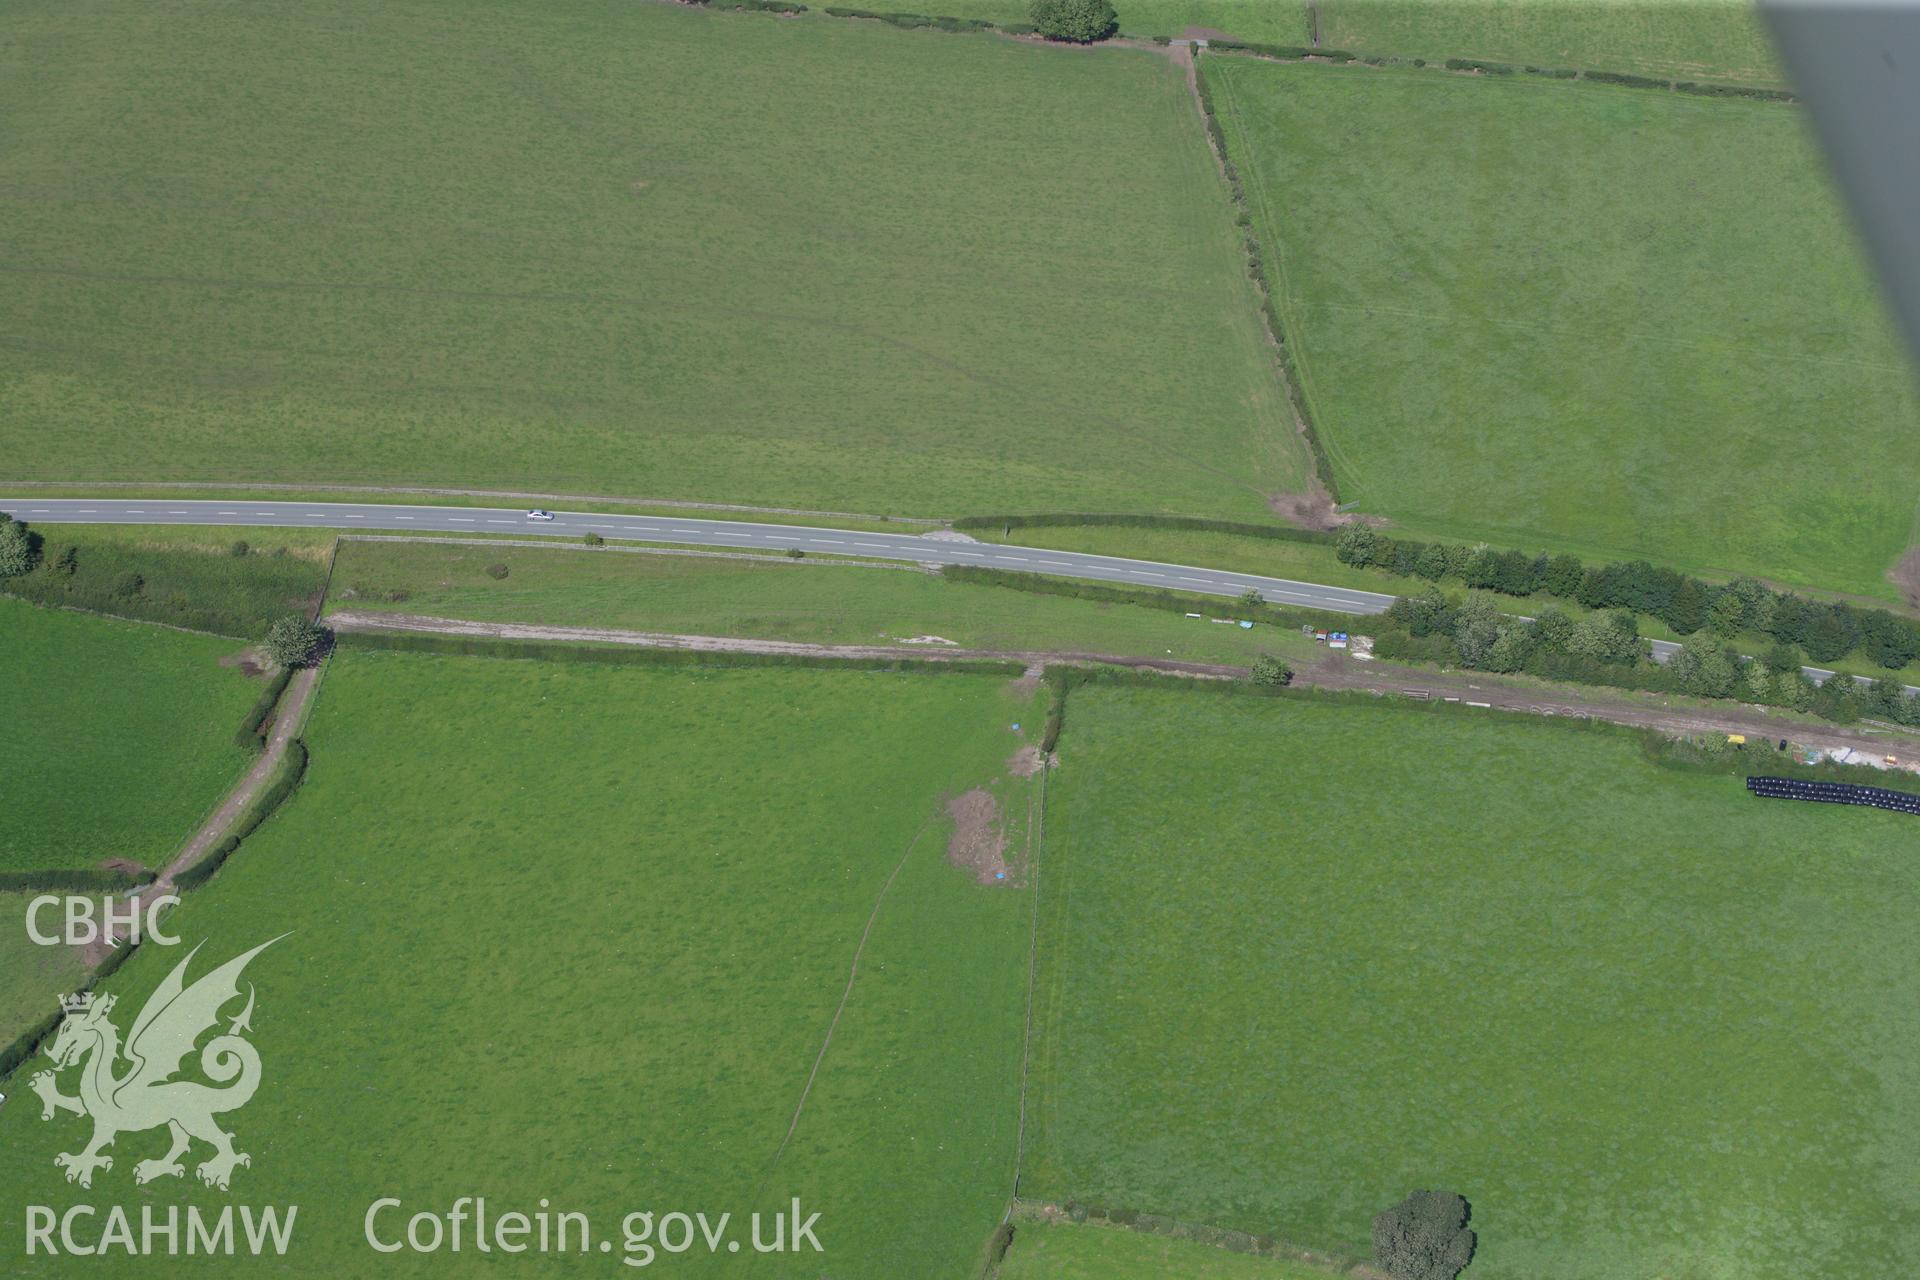 RCAHMW colour oblique aerial photograph of a section of Offa's Dyke or Whitford Dyke, northwest of Tre Abbot-Fawr. Taken on 30 July 2009 by Toby Driver